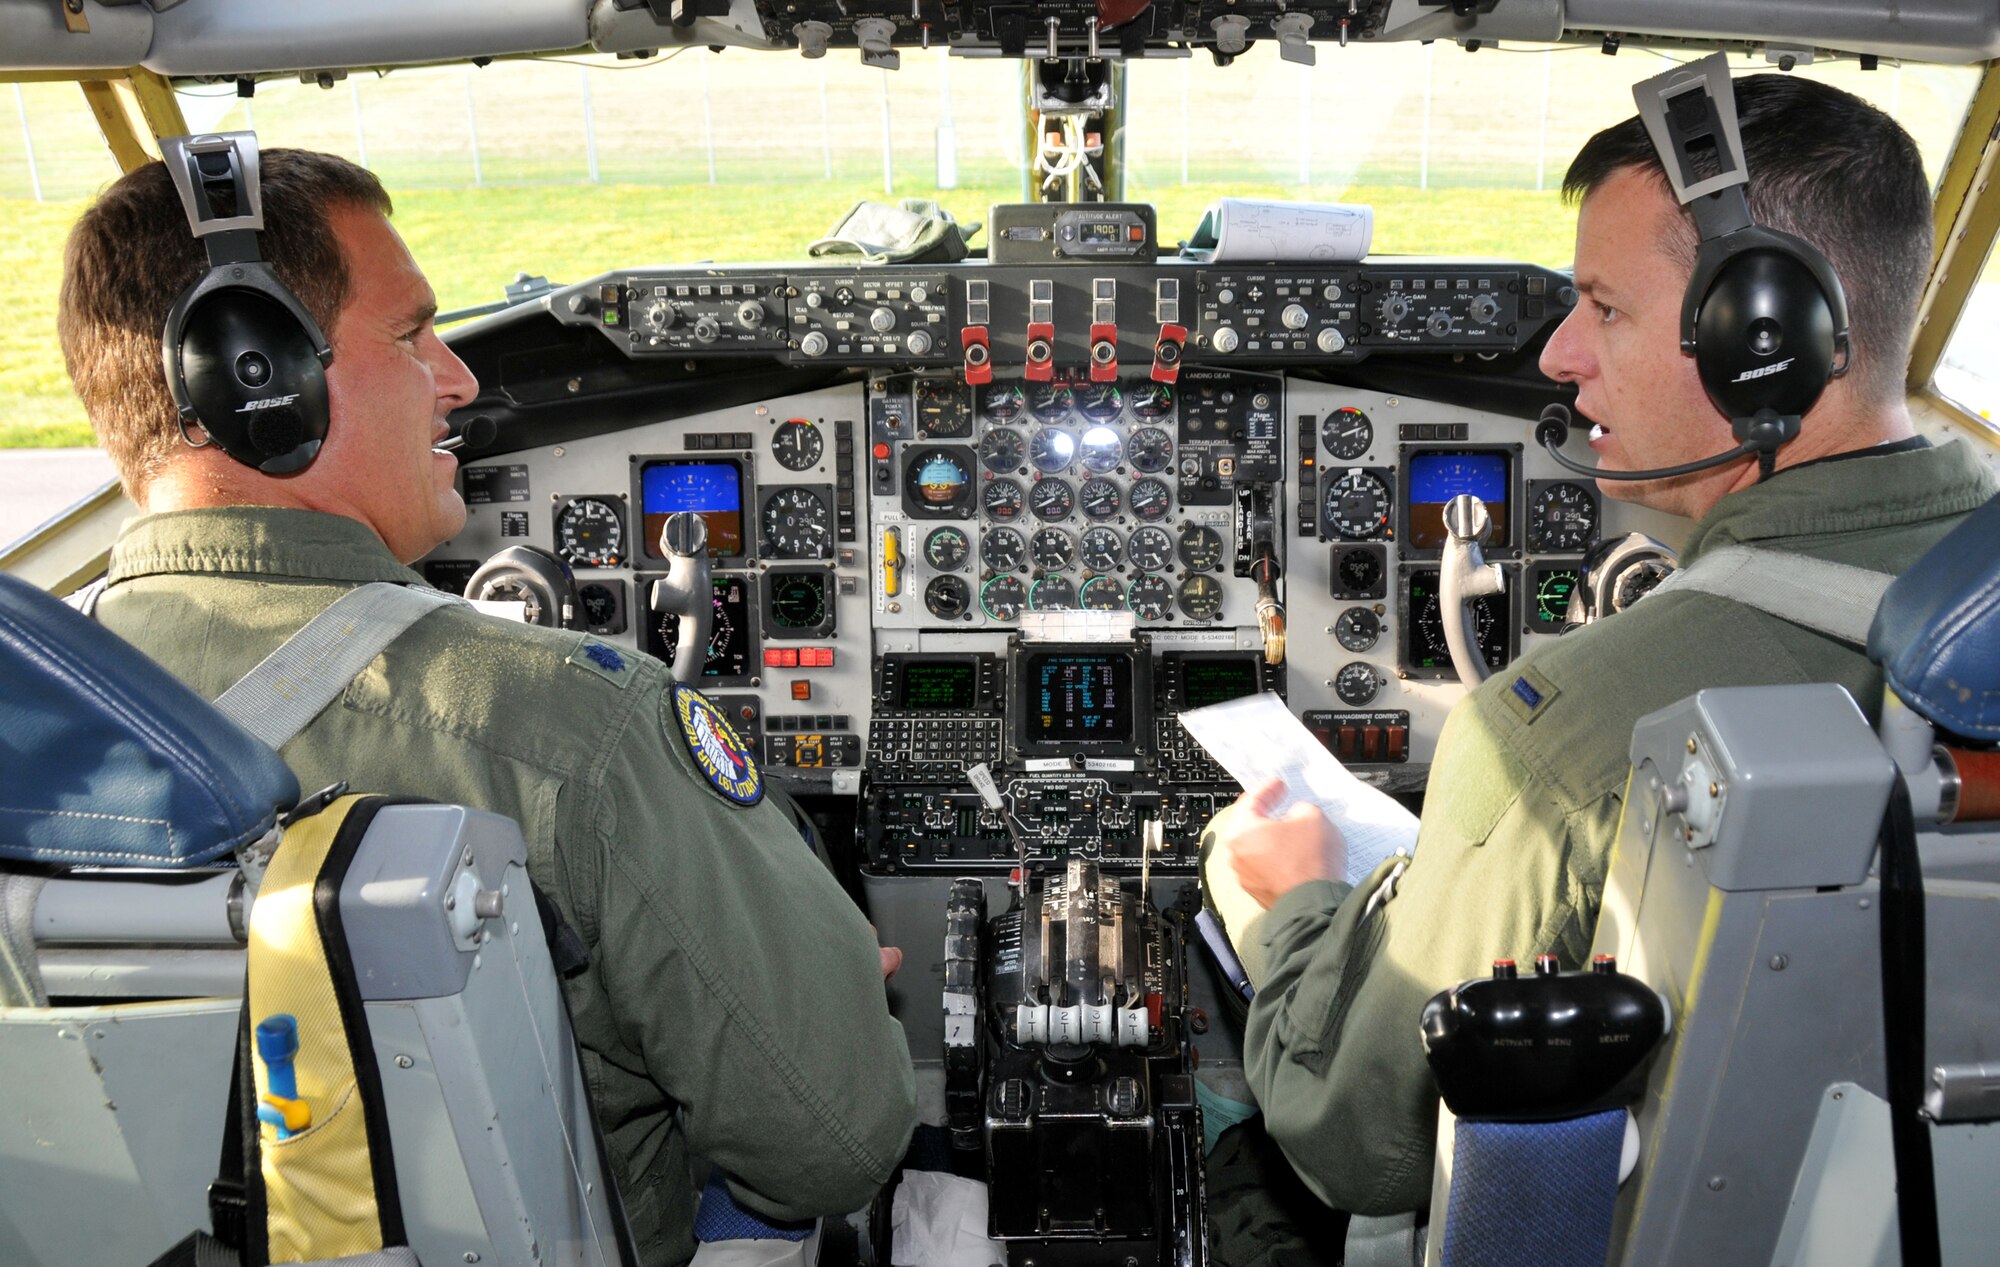 Lt. Col. Boyd Badli and 1st Lt. David Geerdes, both pilots with the 151st Air Refueling Wing, prepare for an Airbourne Warning and Control System (AWACS) refueling mission onboard a Utah Air National Guard KC-135 tanker. More than 35 Airmen from the Utah Air National Guard are deployed to Geilenkirchen Air Base, Germany from July 26 to August 7 to support the air refueling training for the NATO AWACS aircrews. The NATO crews are preparing for an upcoming deployment to support the International Security Assistance Force. U.S. Air Force photo by Airman 1st Class Lillian Chatwin. 